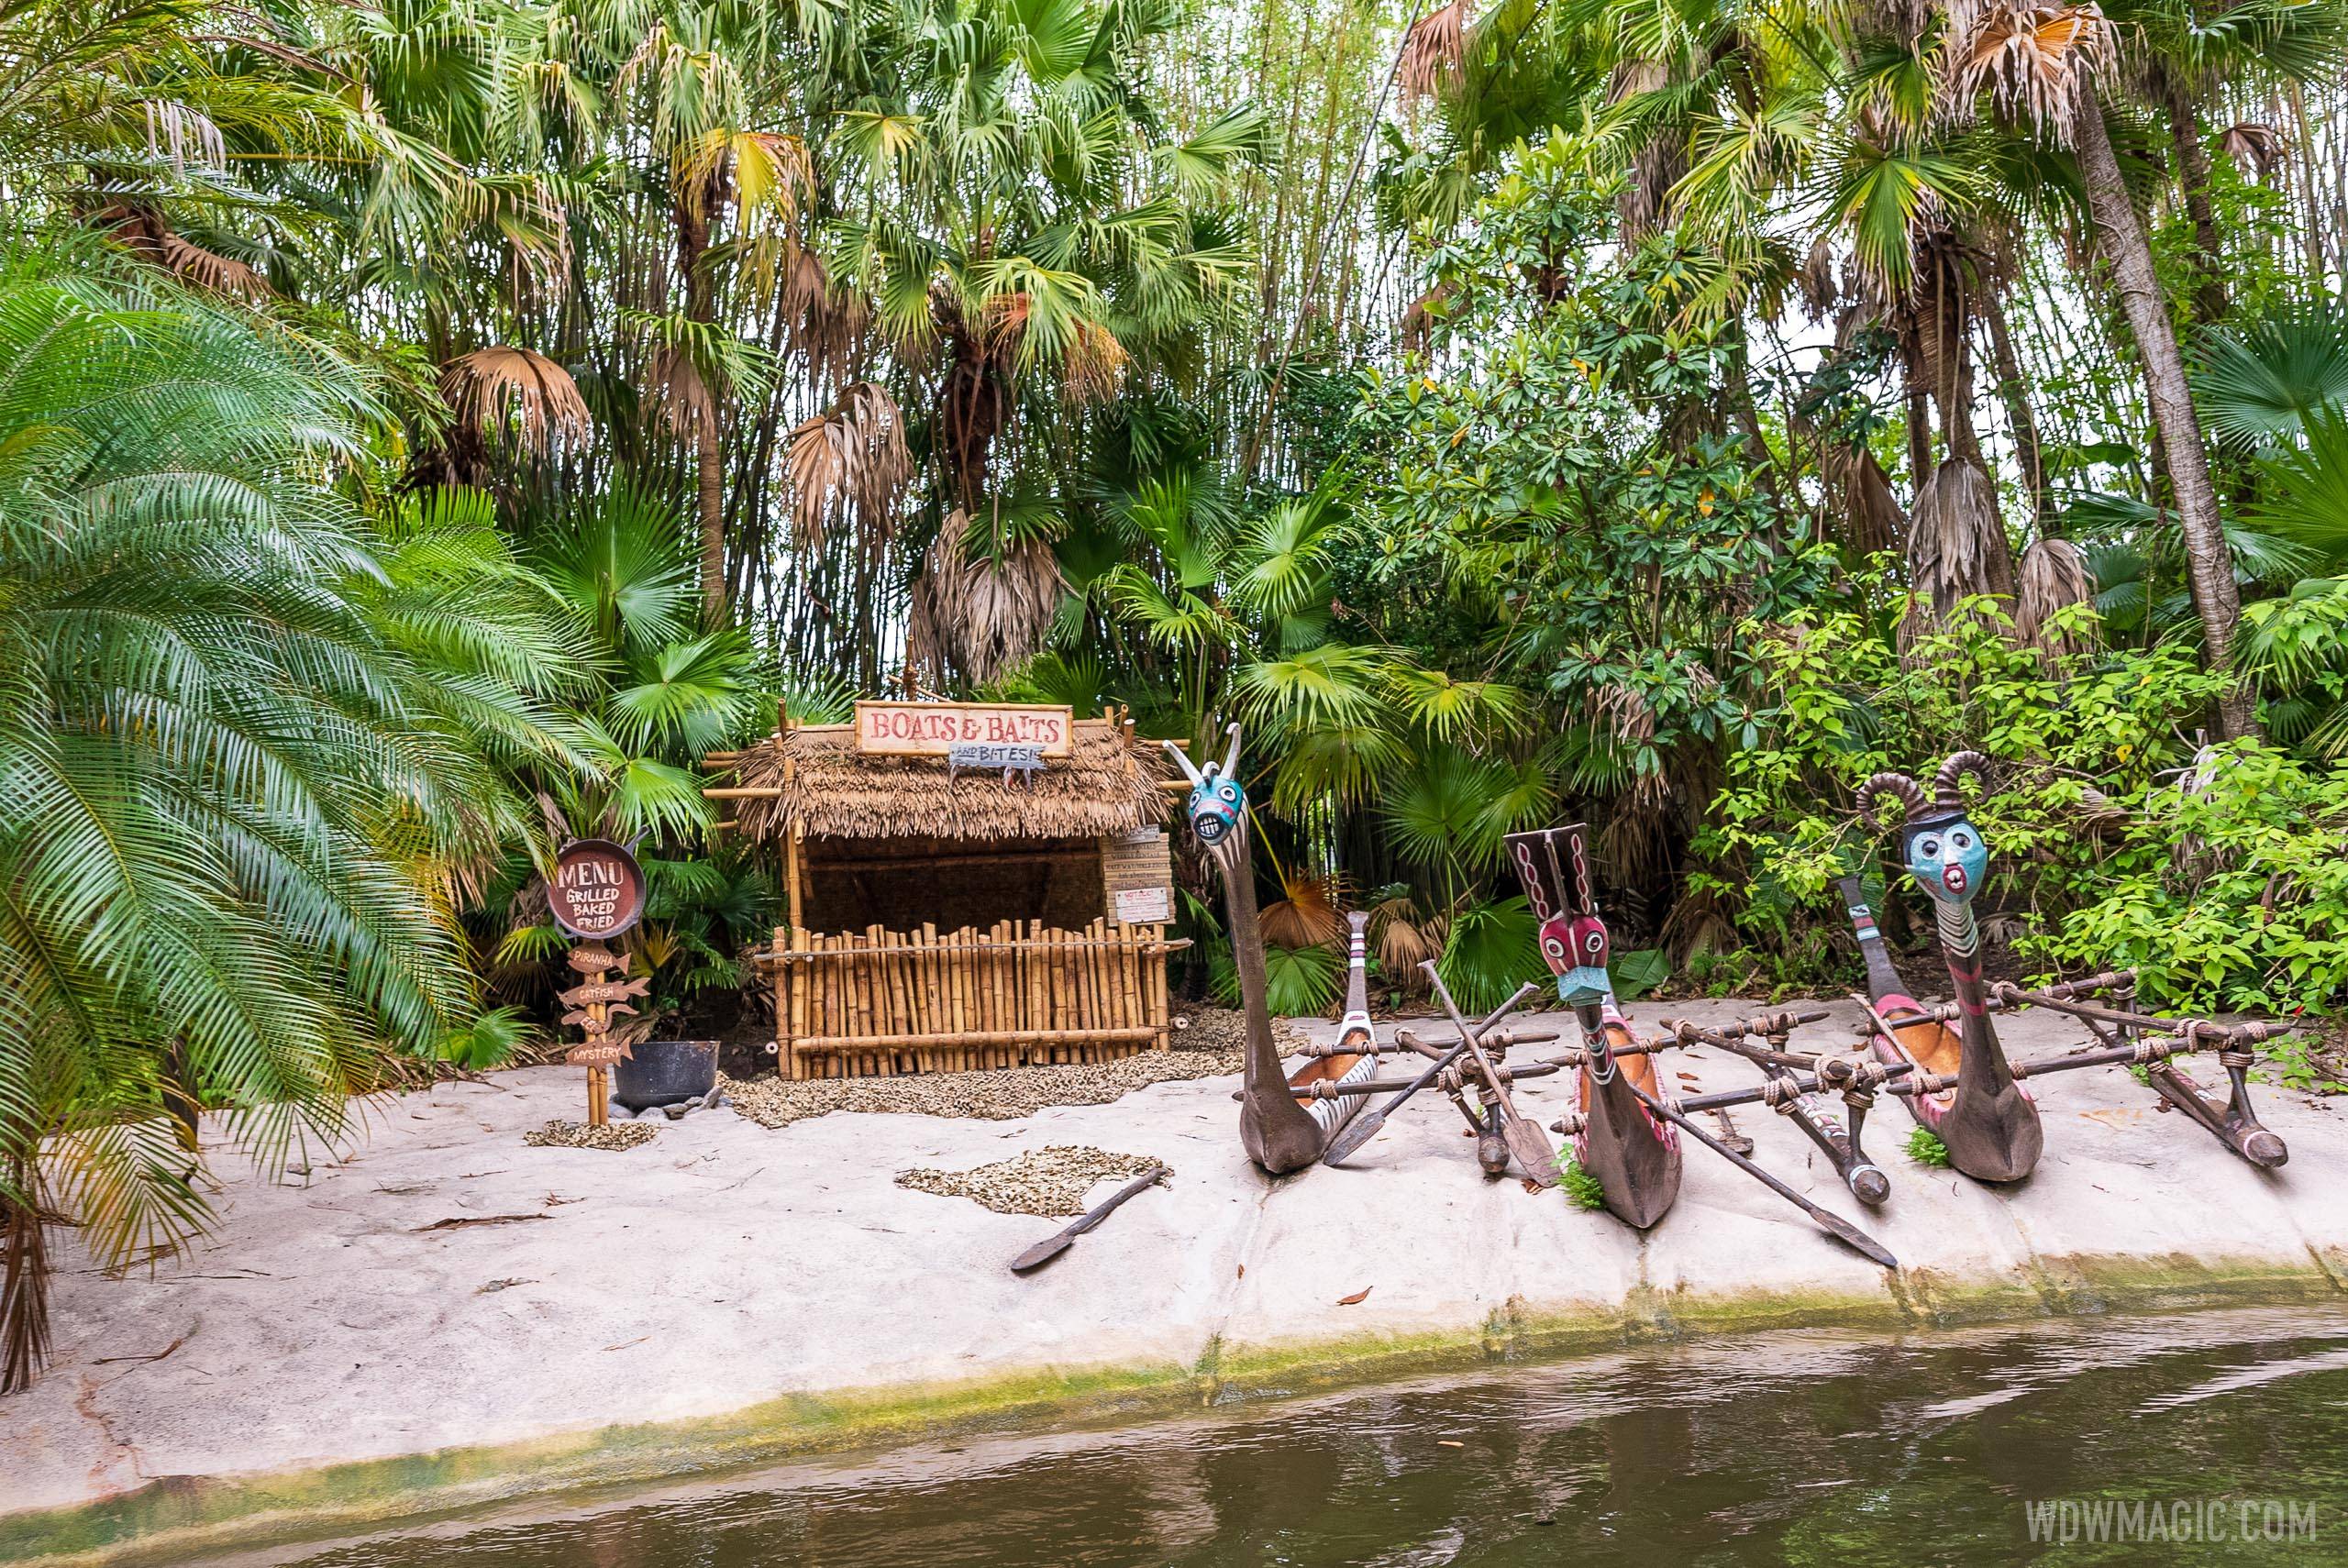 Third new scene installed at the Jungle Cruise - 'Boats and Baits - AND BITES'